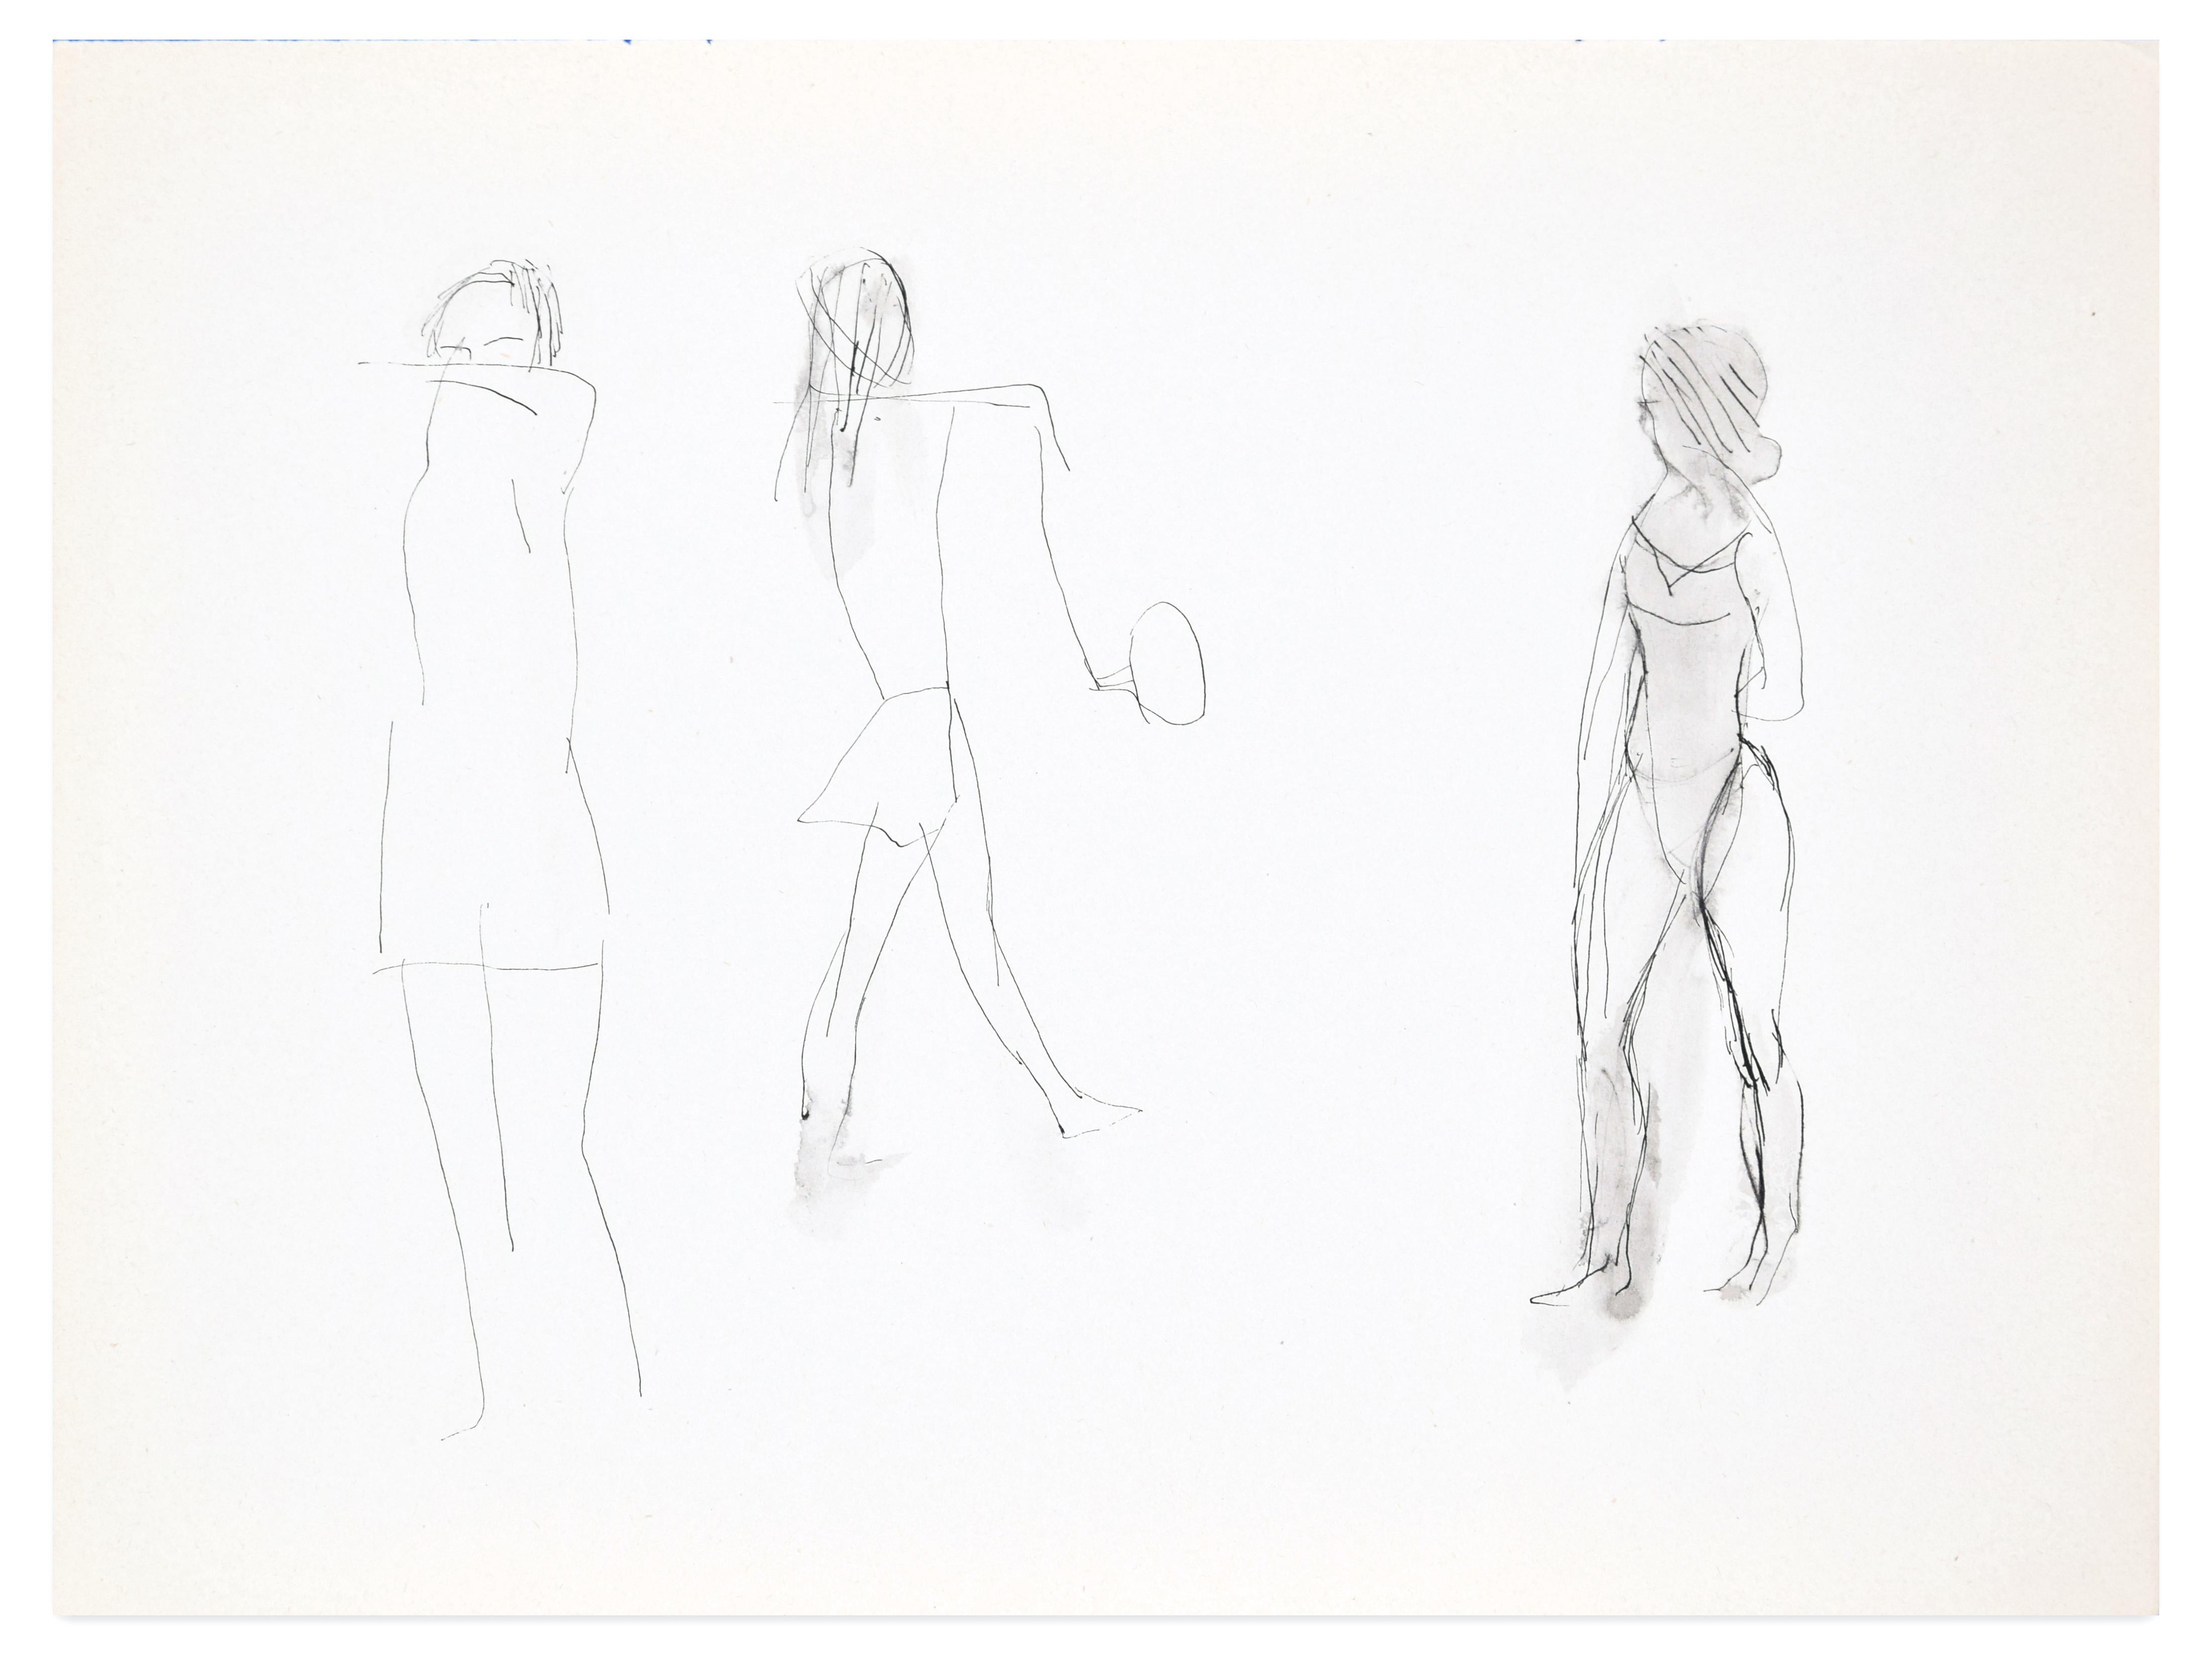 Figures is an original drawing on ivory paper realized by Flor David in the 1950s

This is an original pen and watercolored drawing.The artwork represents the study of figures, skillfully depicted through confident lines and strokes.

Good